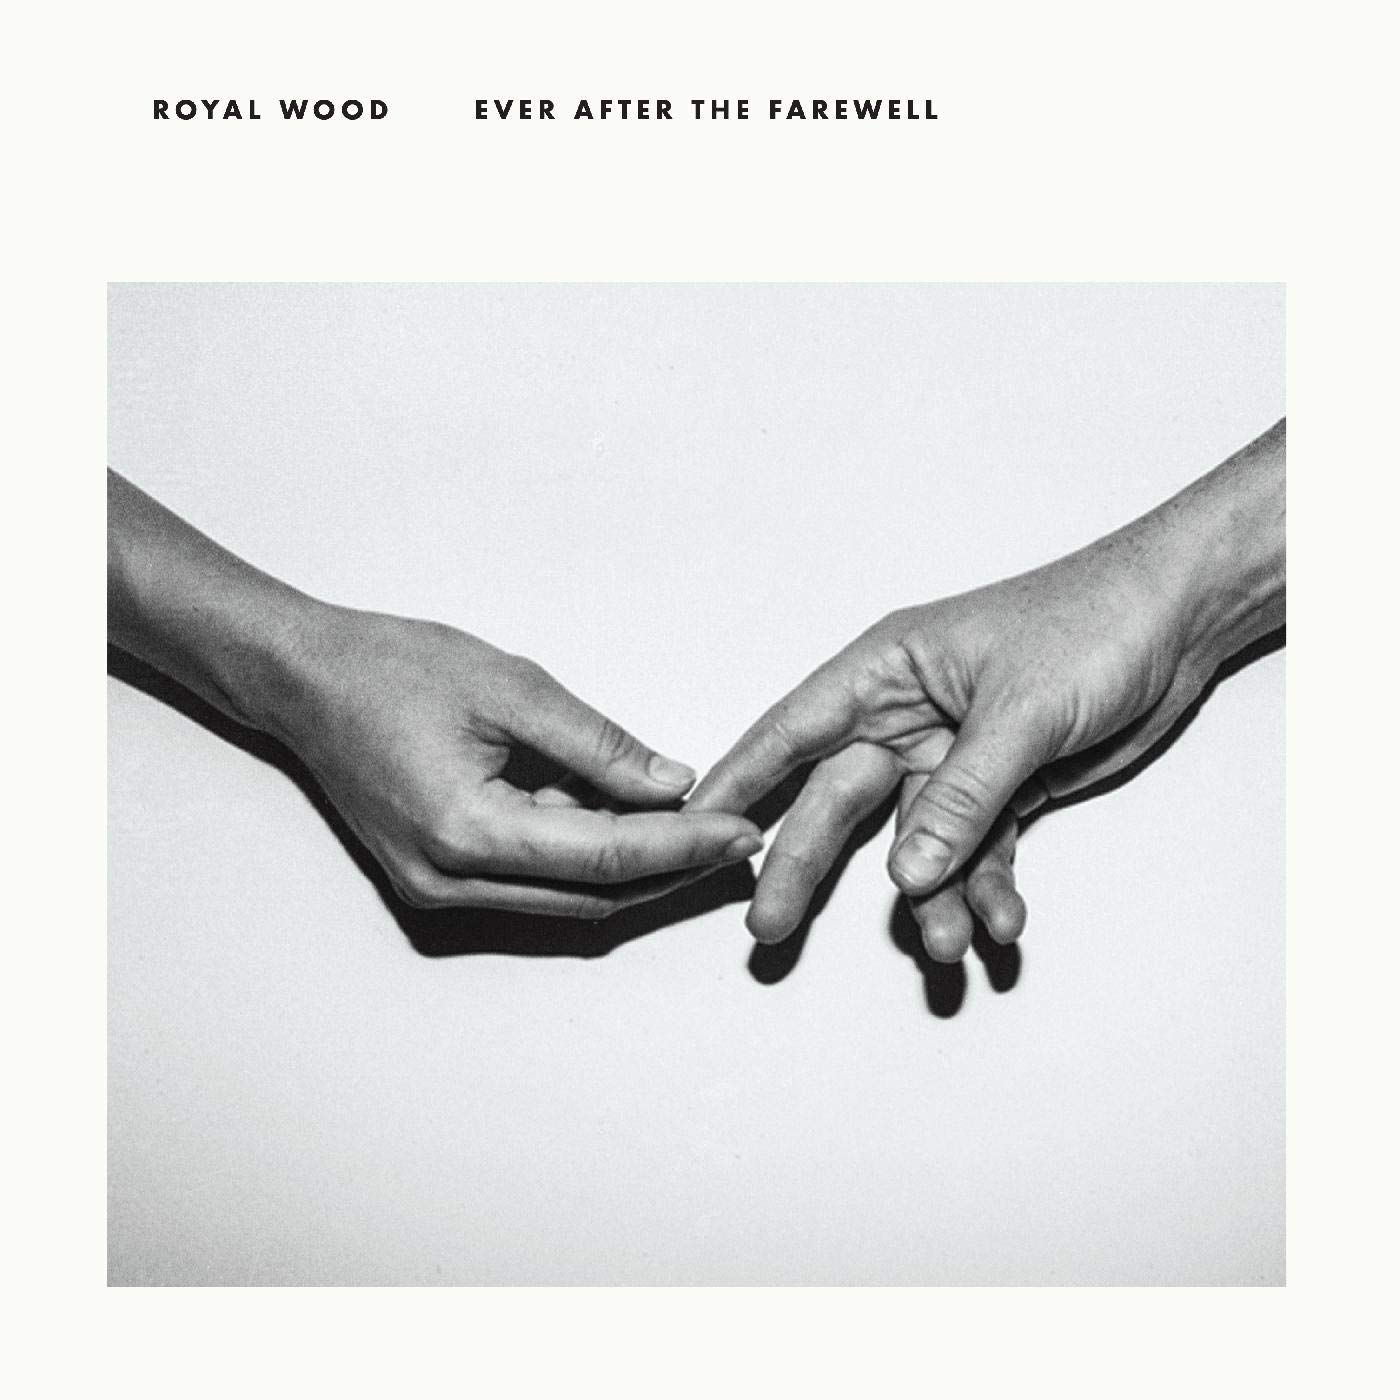 Royal Wood - Ever After the Farewell (Album)